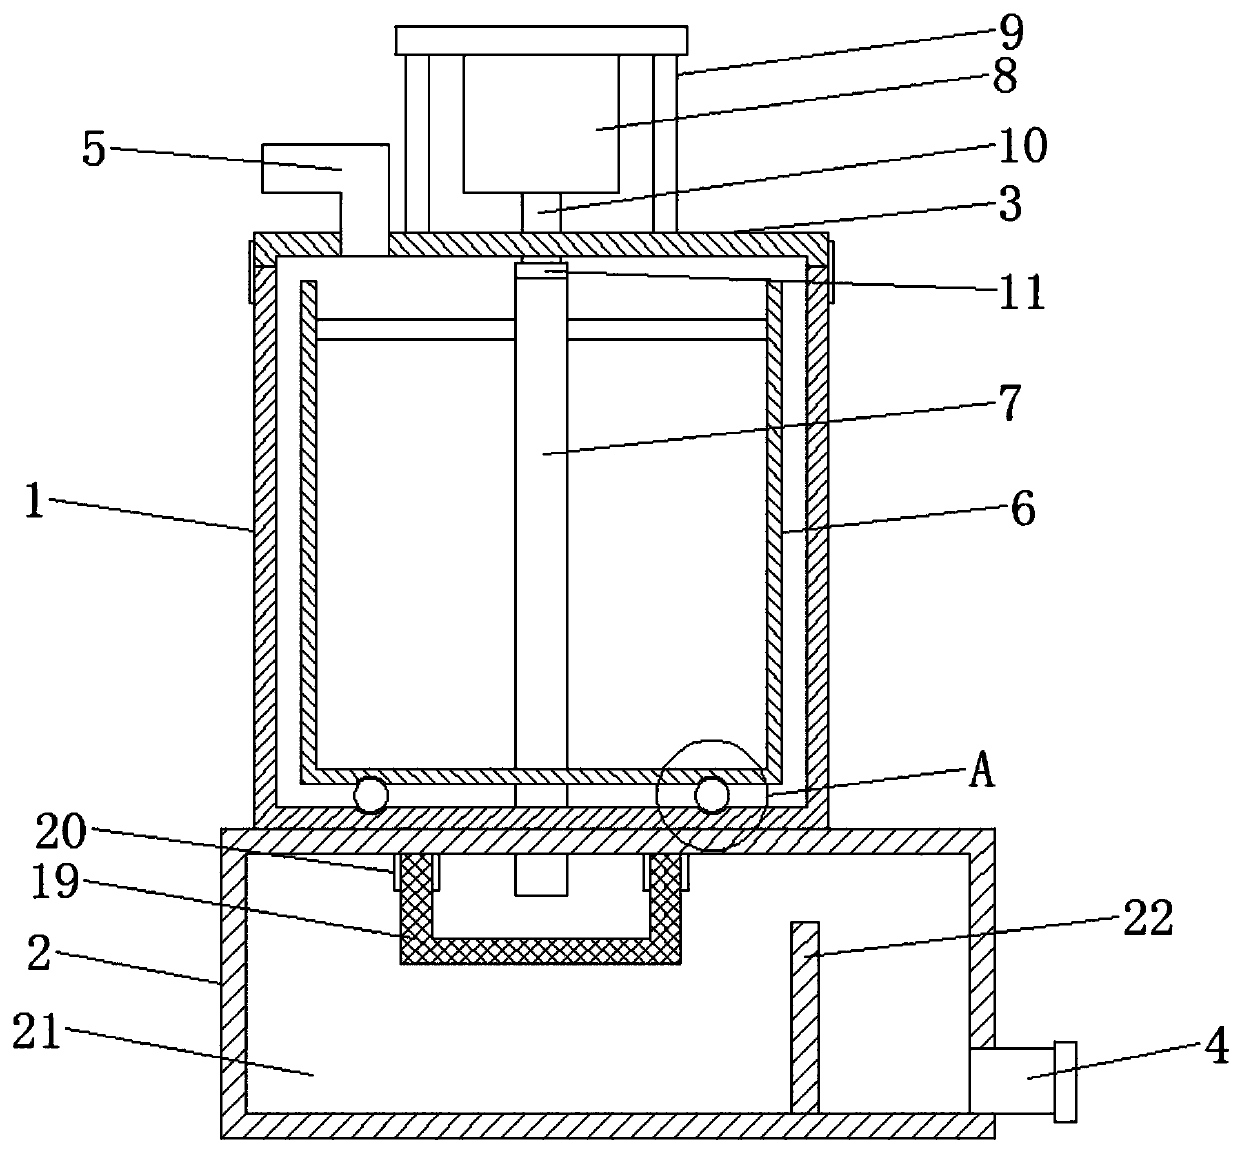 Sewage treatment device for quickly separating impurities